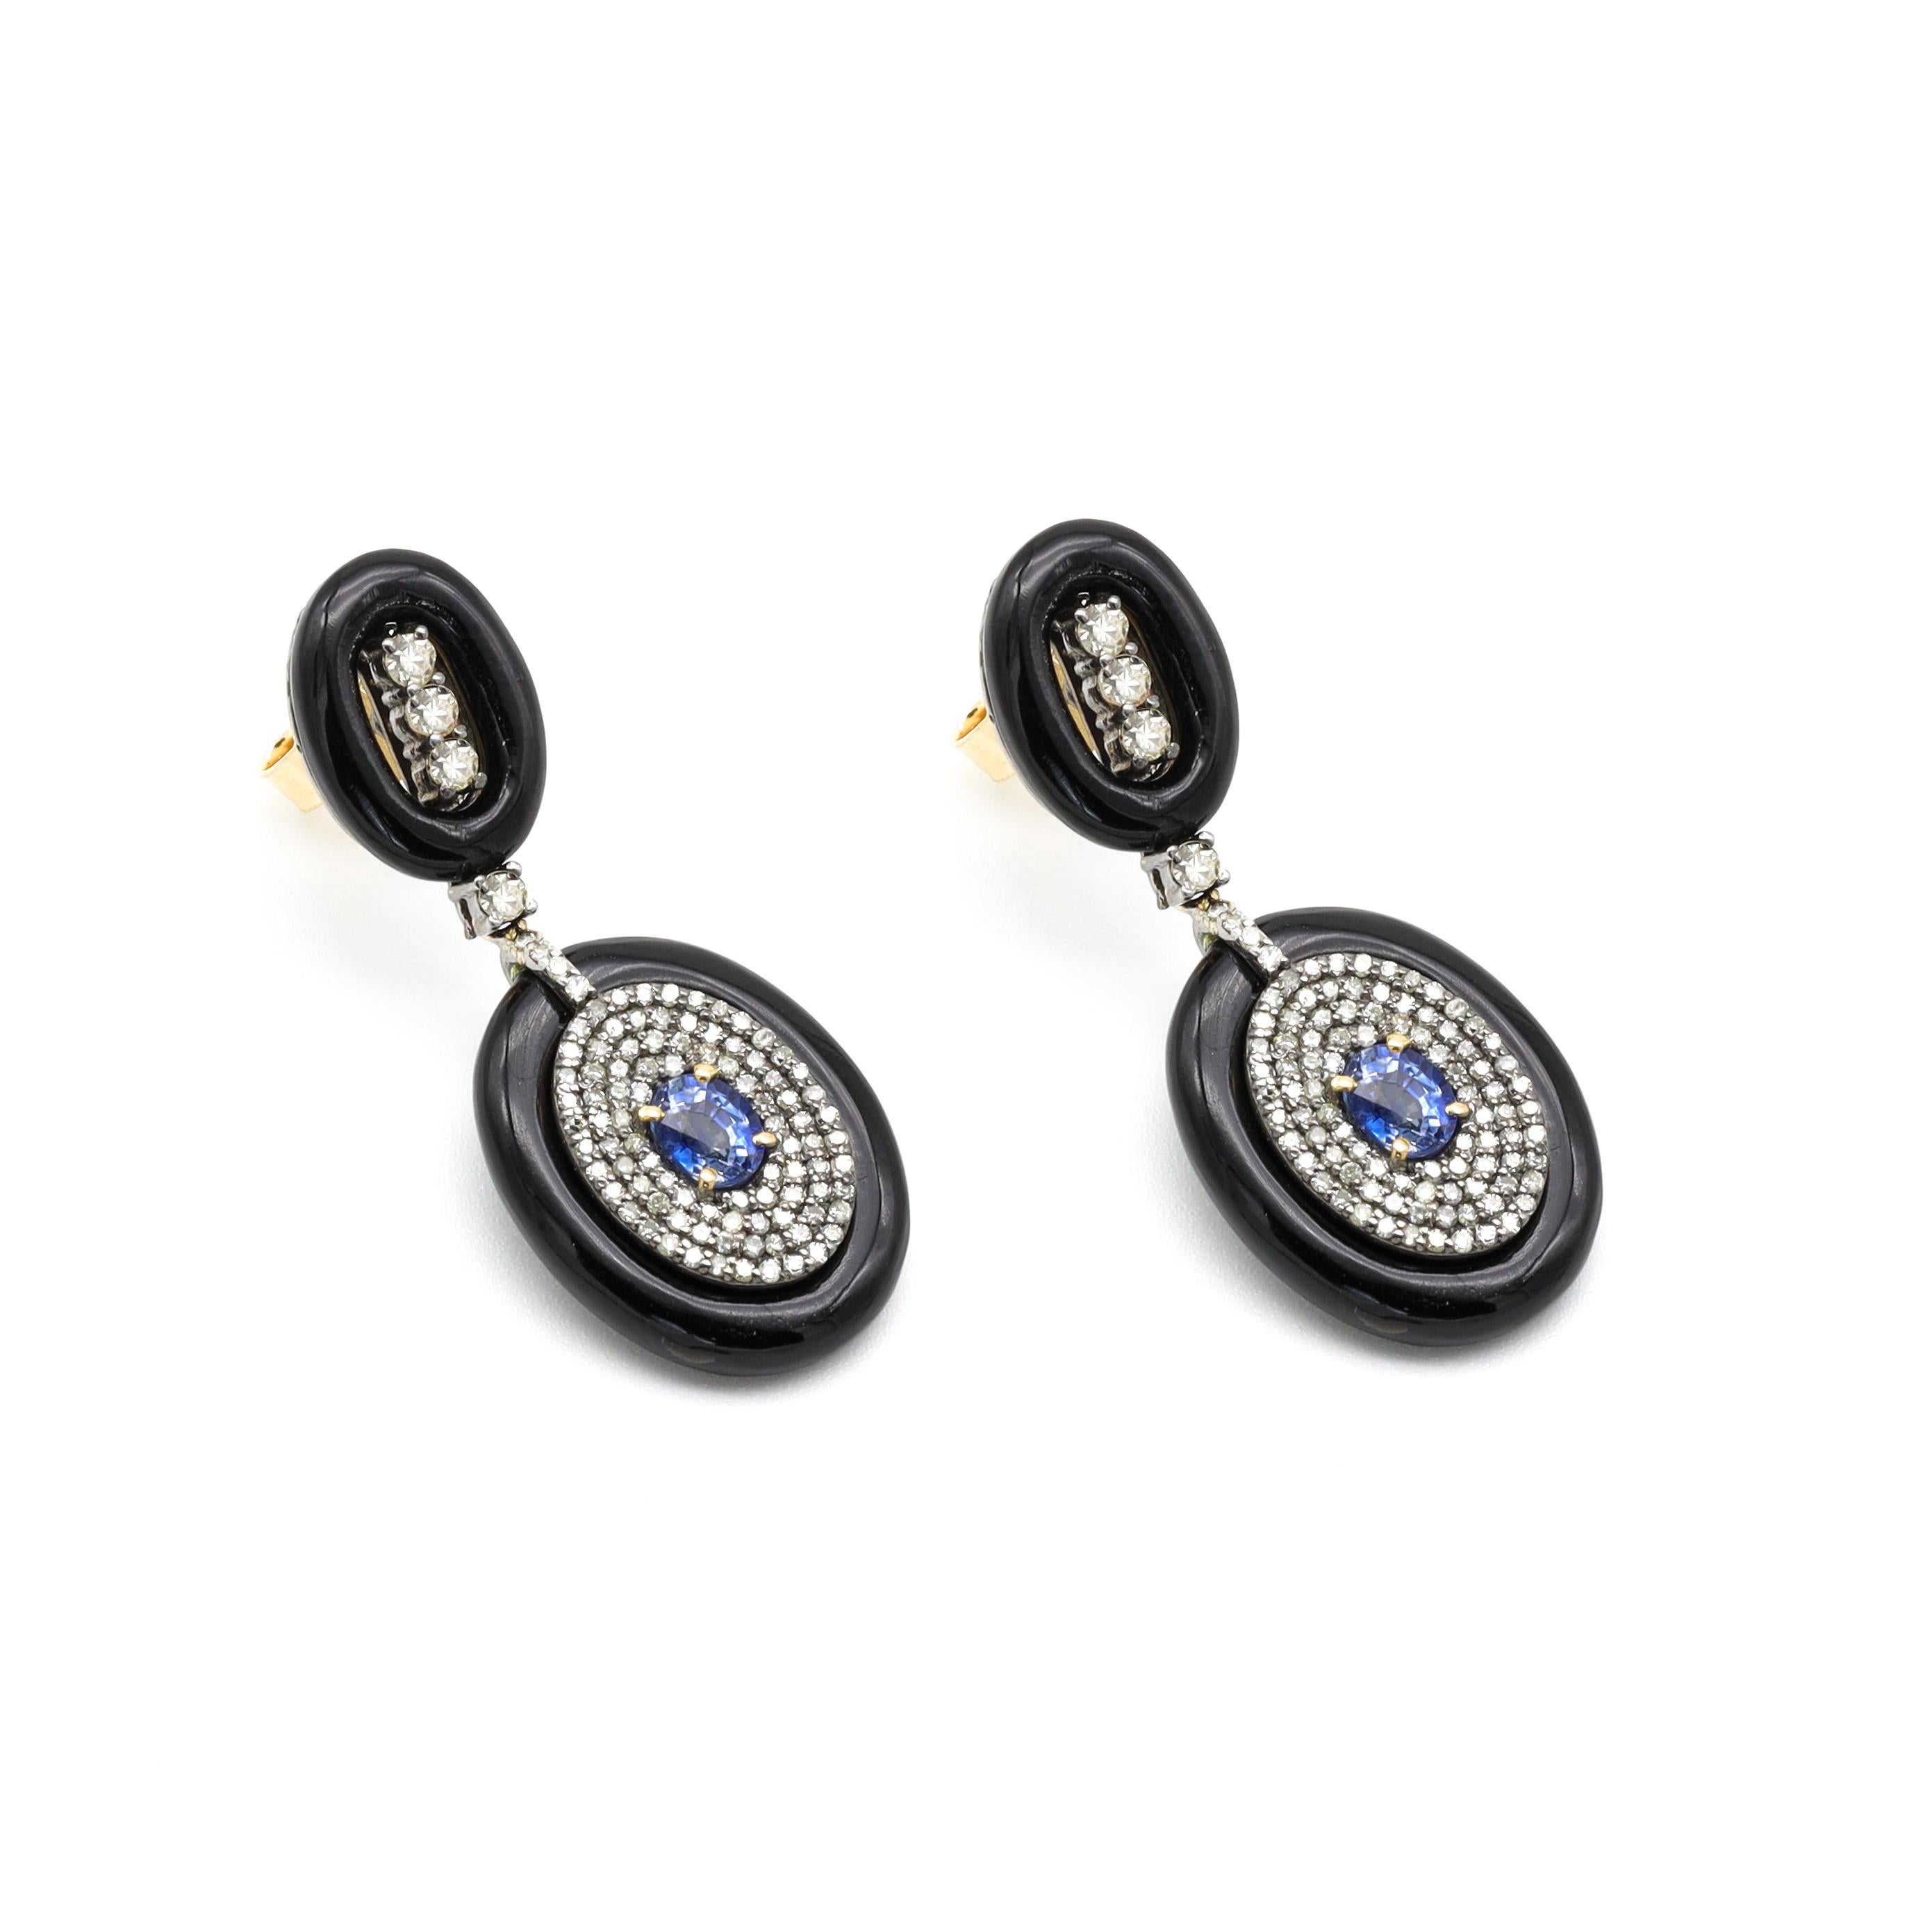 14.41 Carats Diamond, Sapphire, and Black Onyx Drop Earrings in Art-Deco Style

This art-deco style glorious black onyx, cornflower blue sapphire, and diamond earring pair is exceptional. The oval blue sapphire in the center is gracefully enclosed